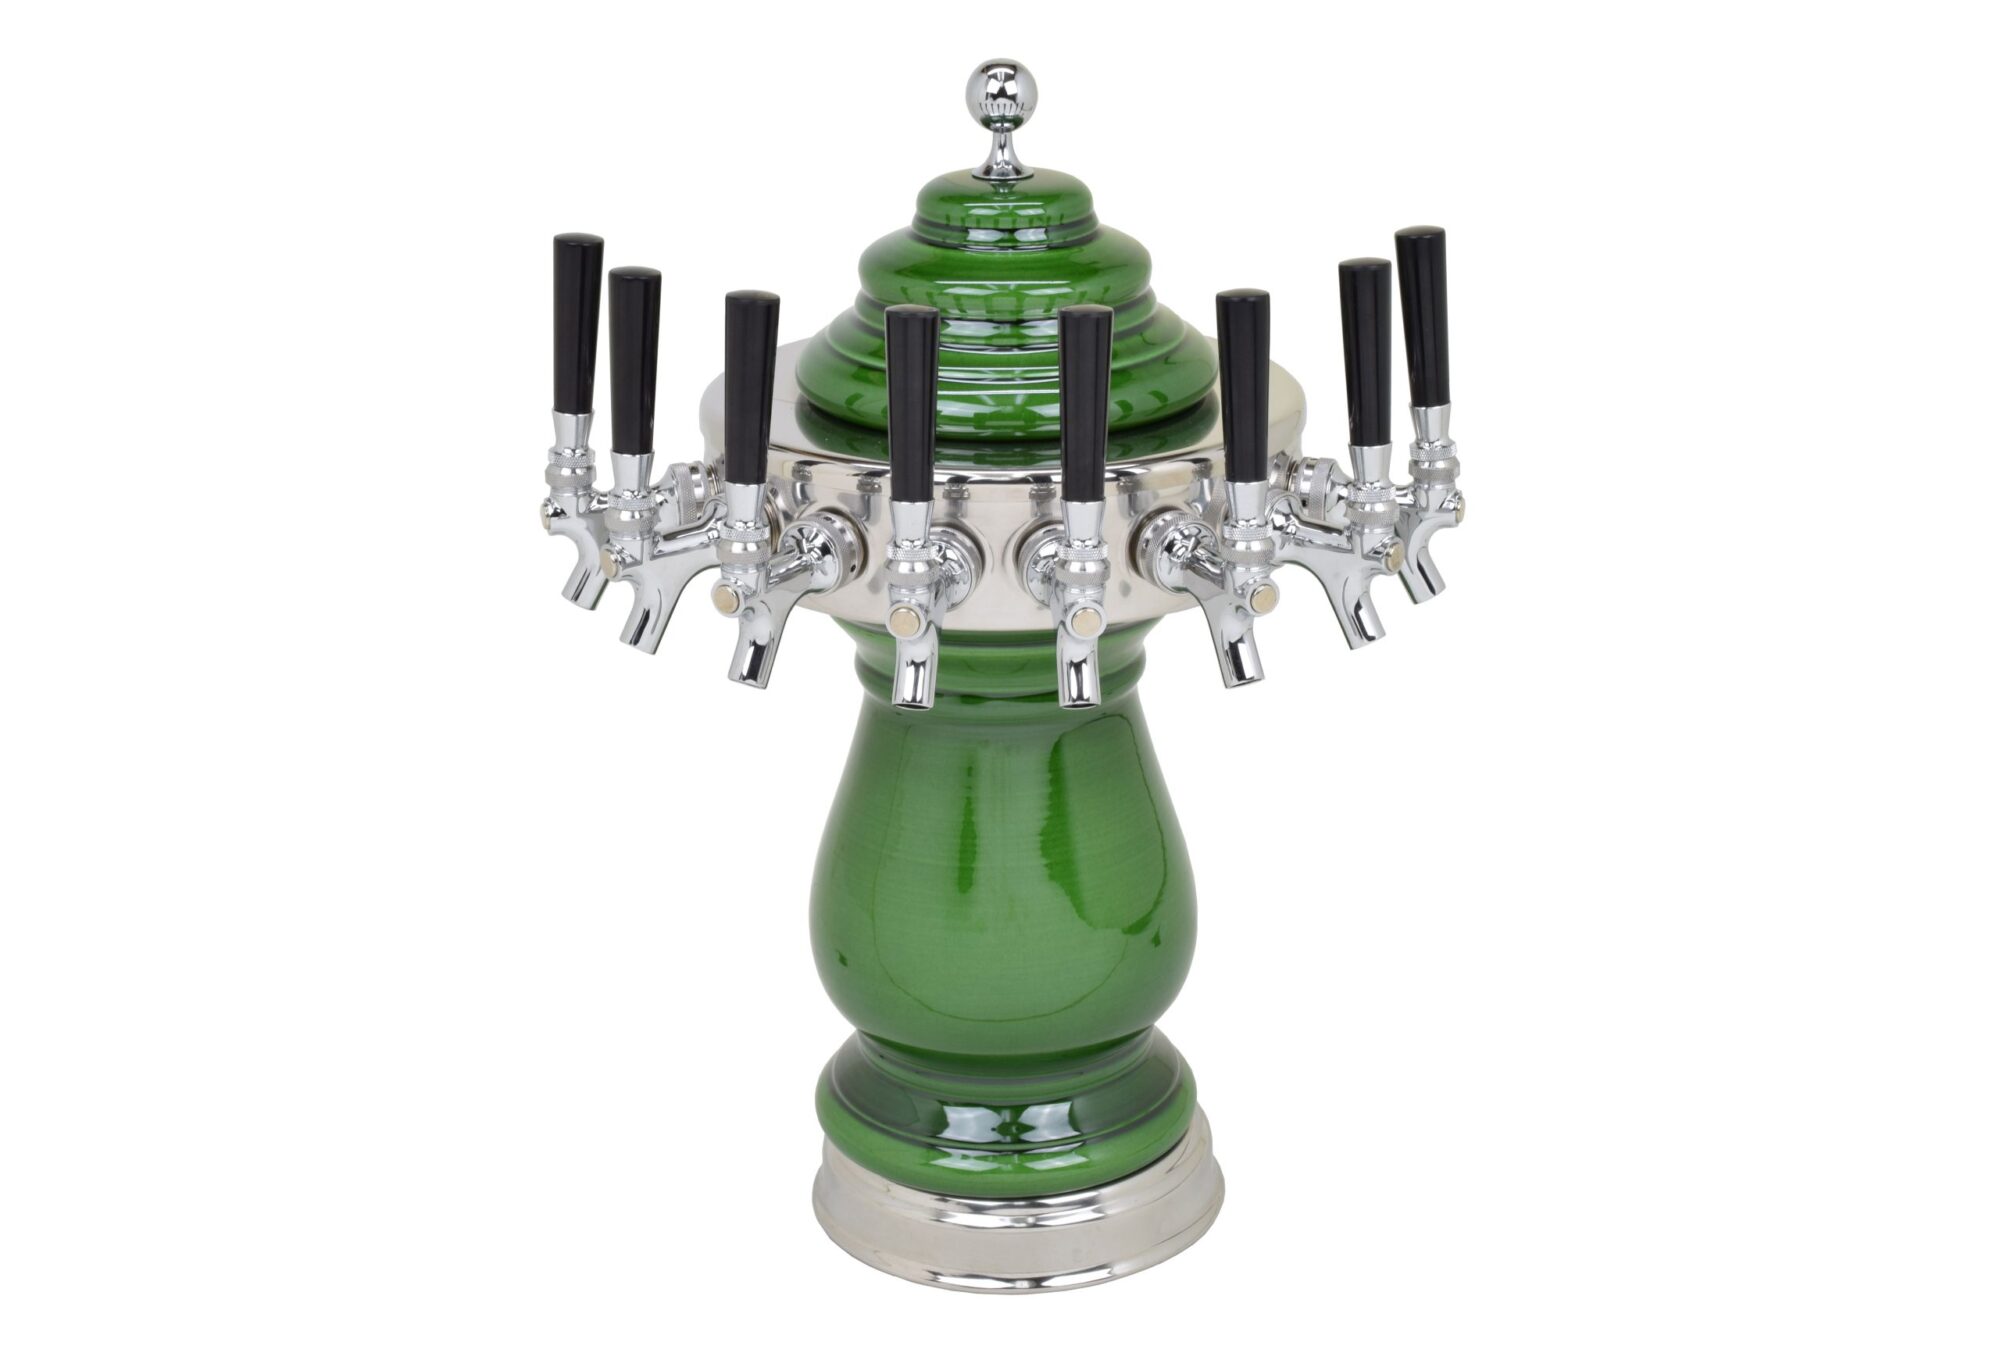 884C-8AG Eight Faucet Ceramic Tower with Chrome Hardware and Faucets - Shown in Antique Green